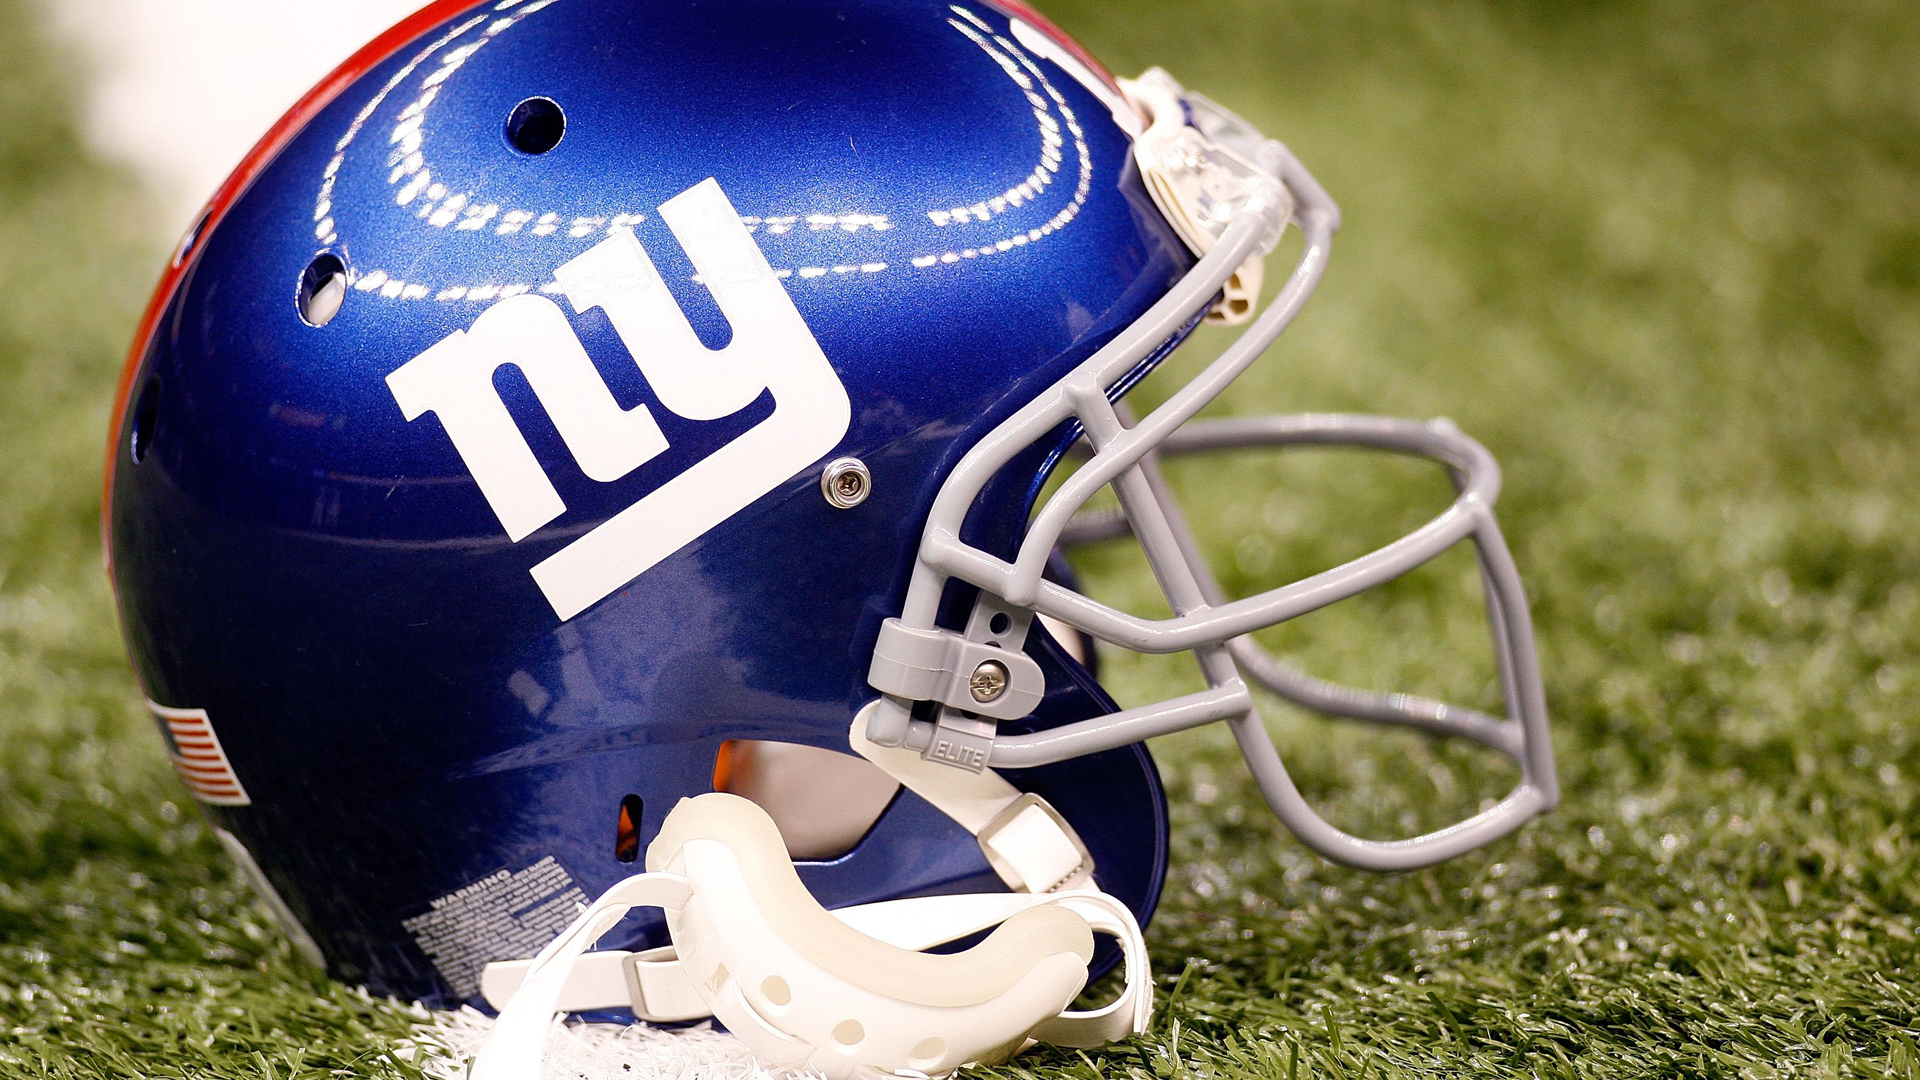 New York Giants Wallpaper Image Photos Pictures Background